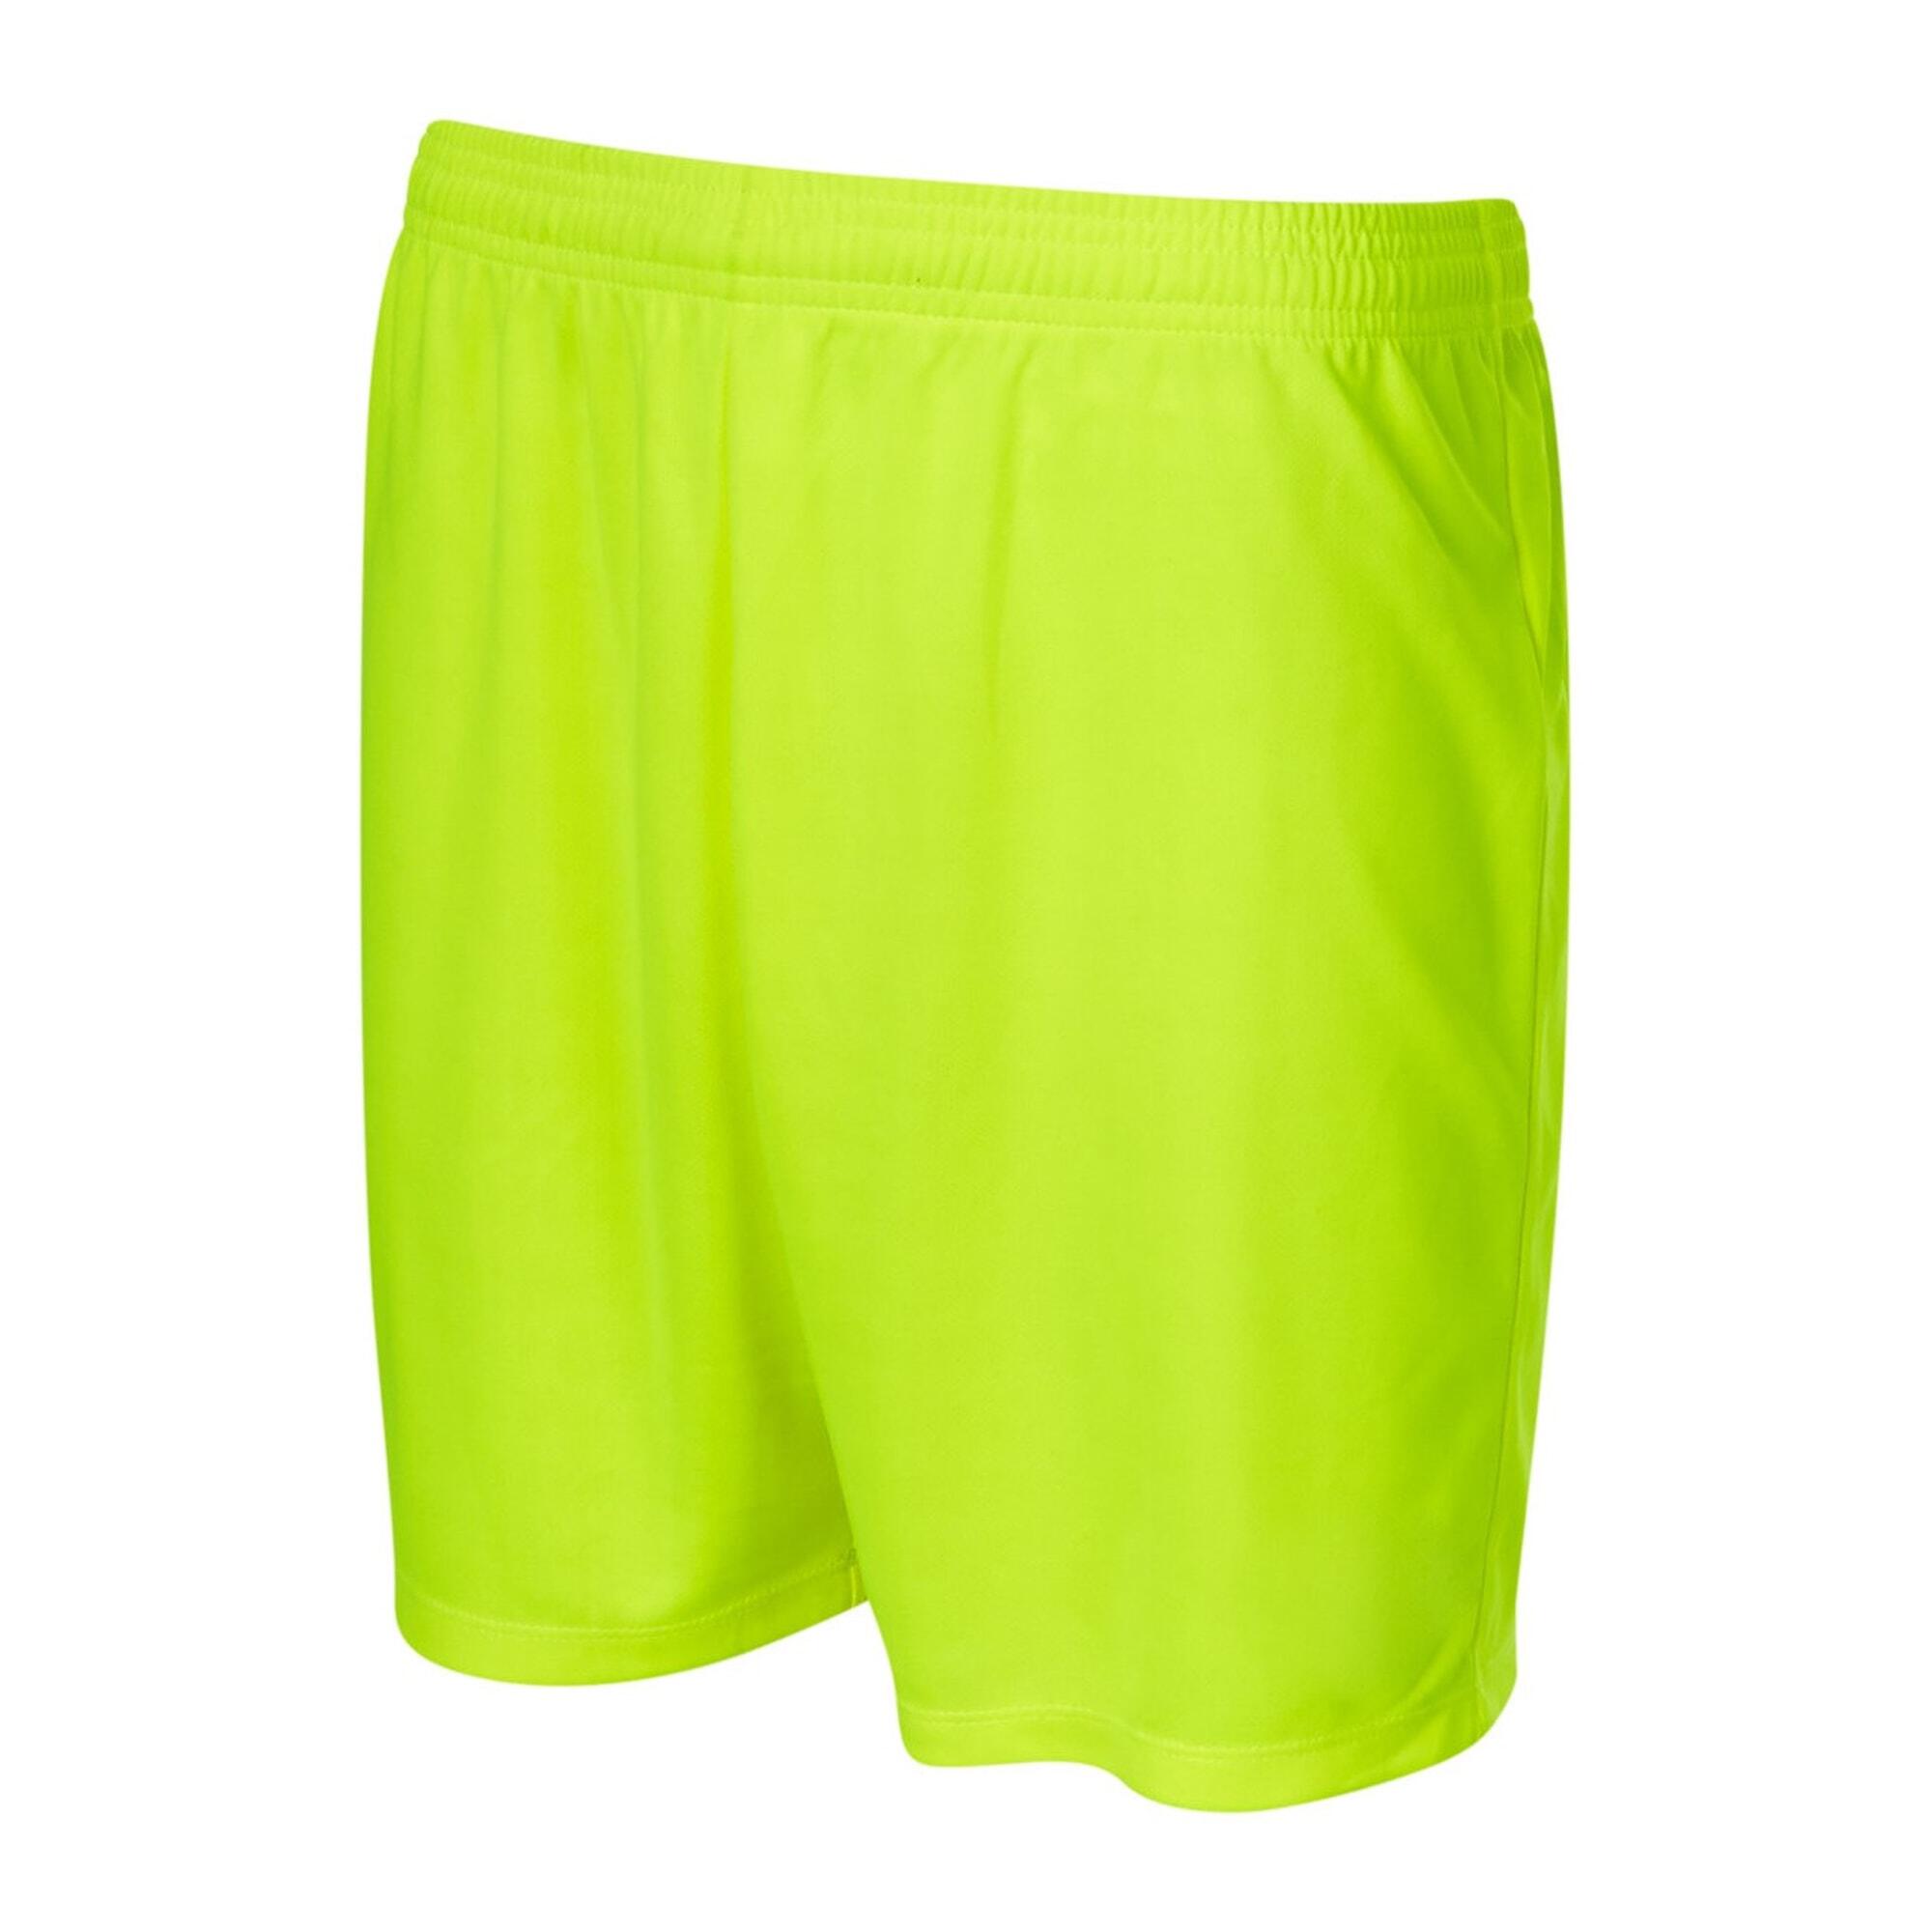 Childrens/Kids Club II Shorts (Safety Yellow/Carbon) 2/2